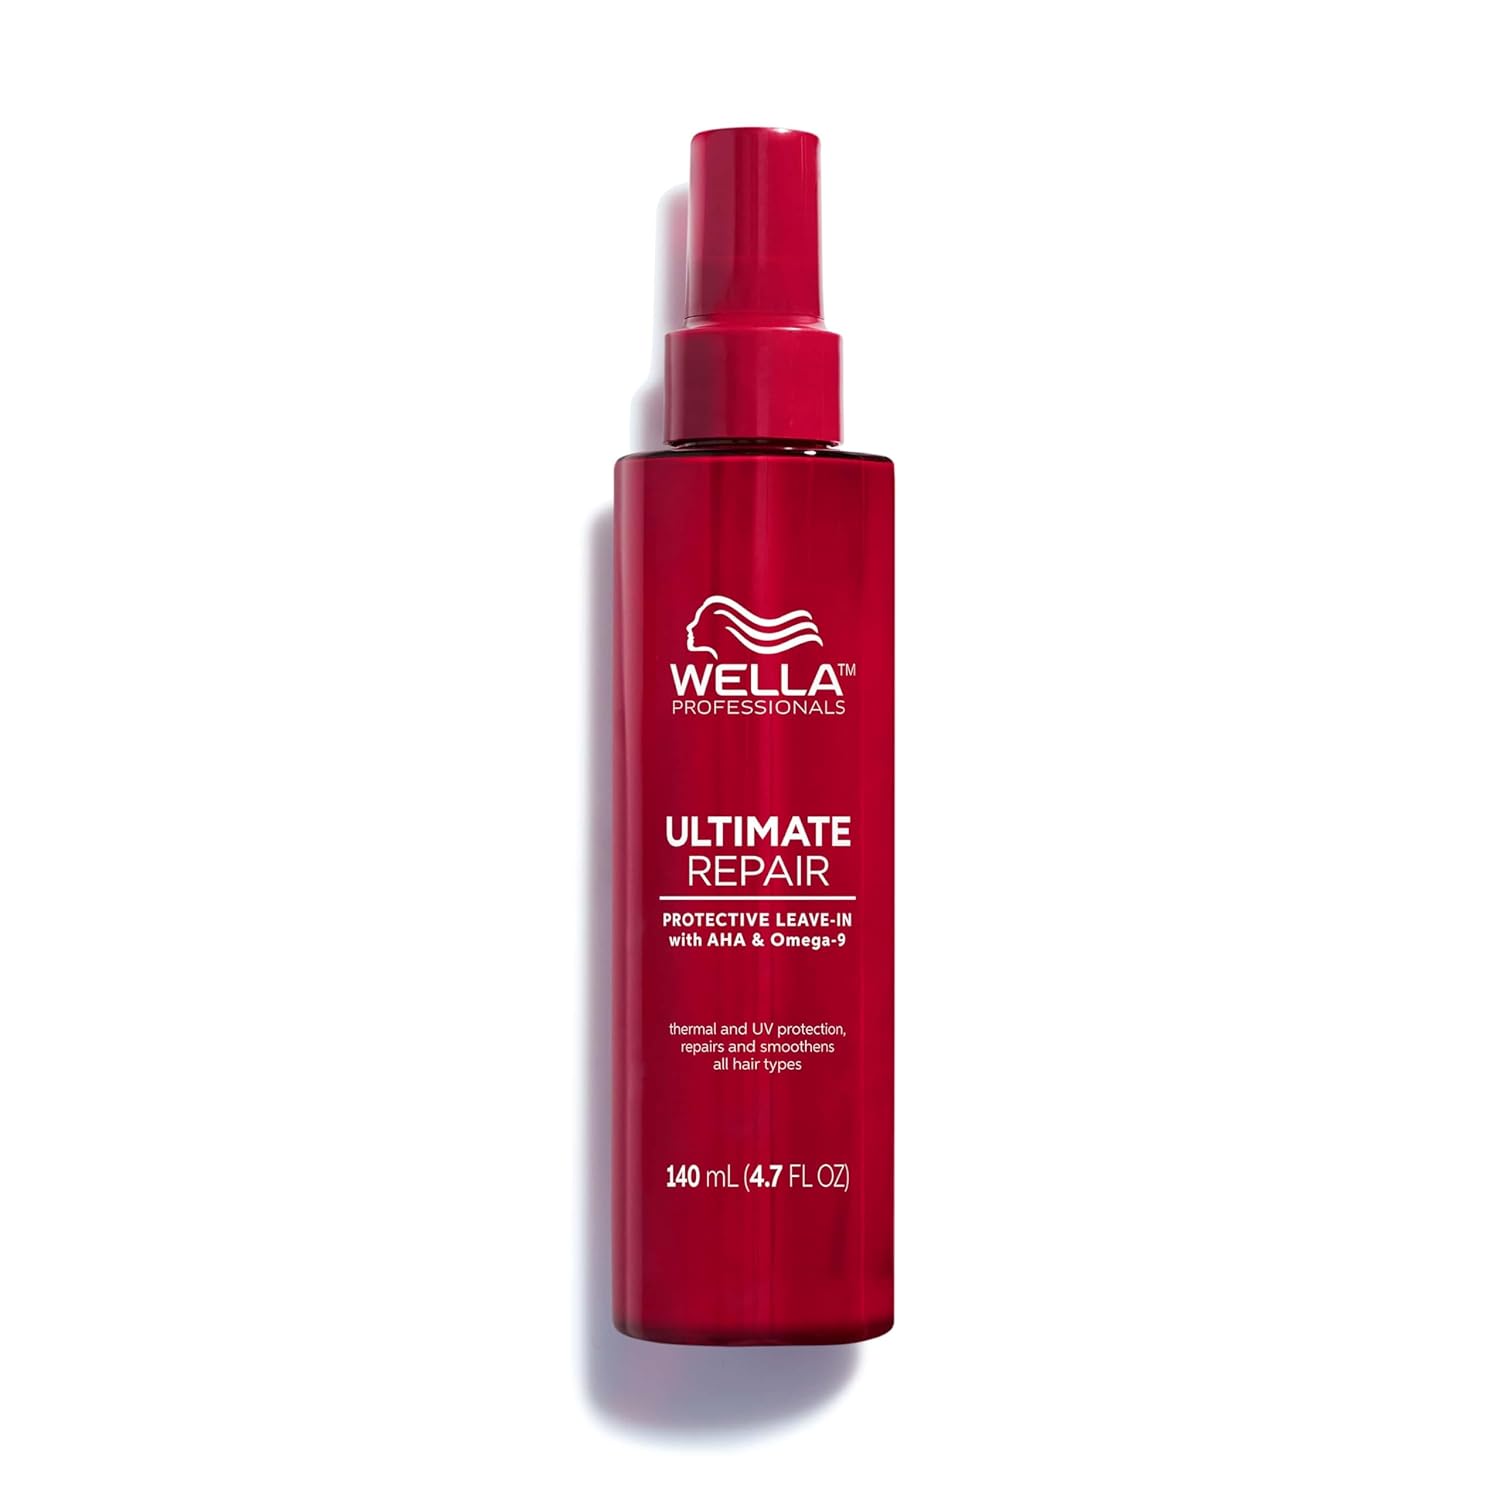 Wella Professionals Ultimate Repair Protective Leave-In Conditioner Spray - Spray Treatment without Rinse